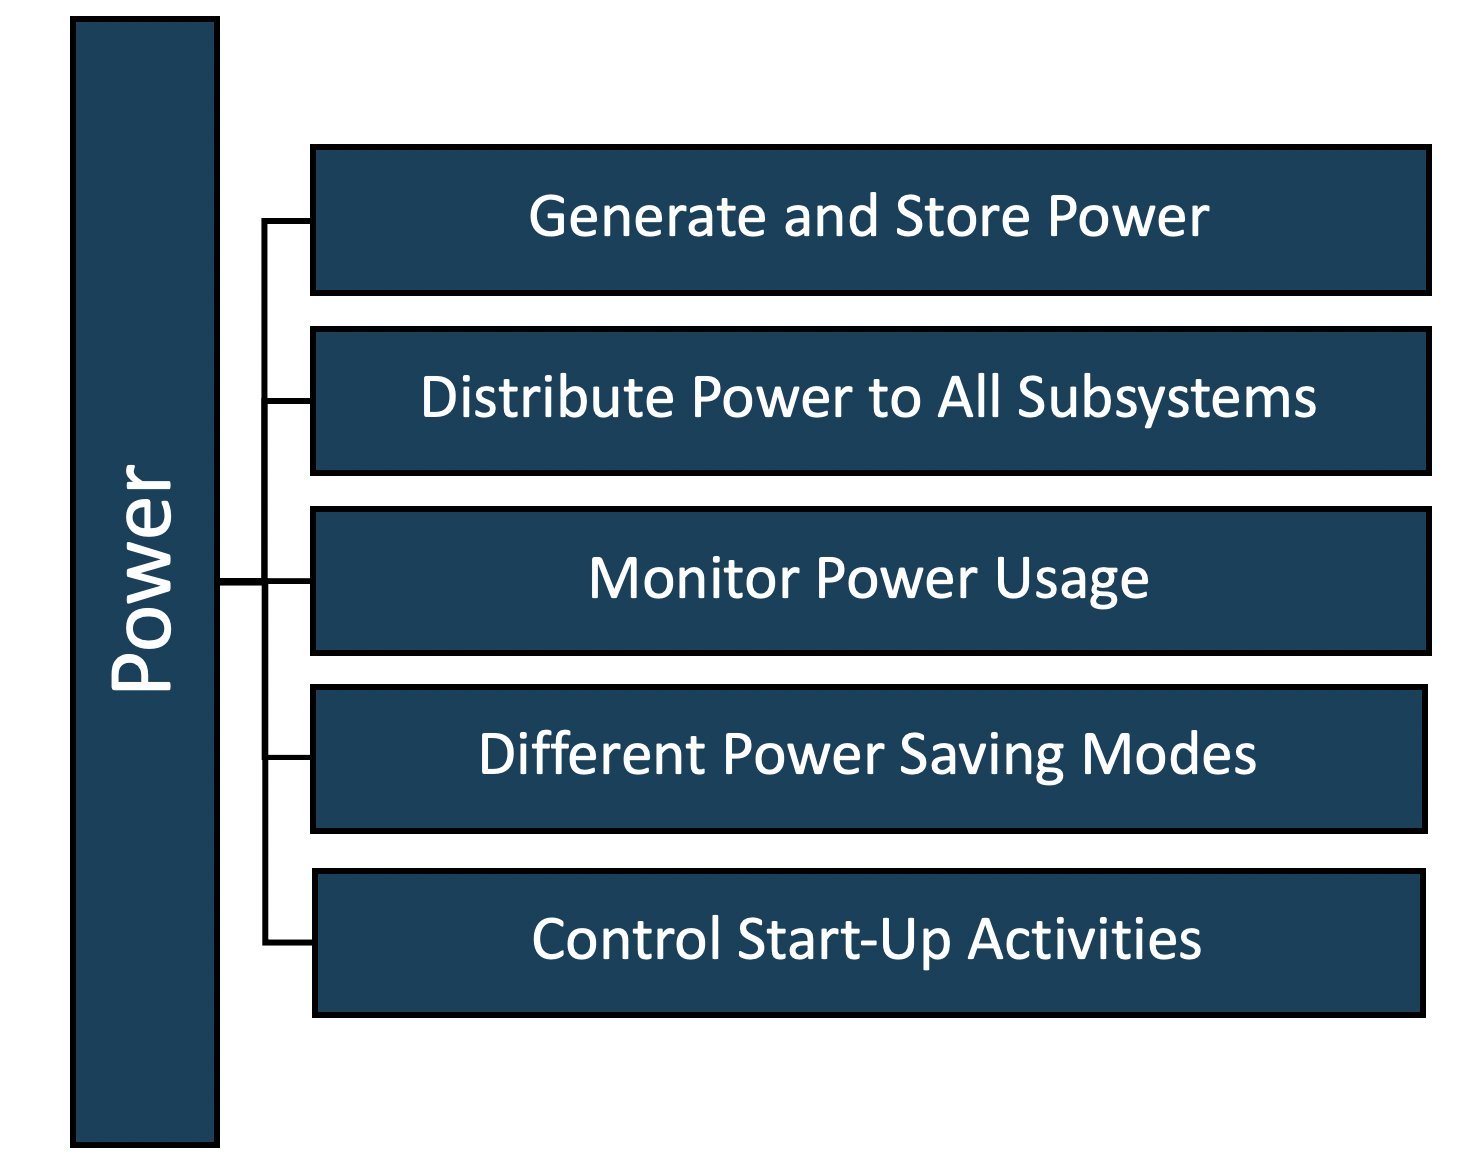 Power
                    Generate and Store Power
                    Distribute Power to All Subsystems
                    Monitor Power Usage
                    Different Power Saving Modes
                    Control Start-Up Activities
                